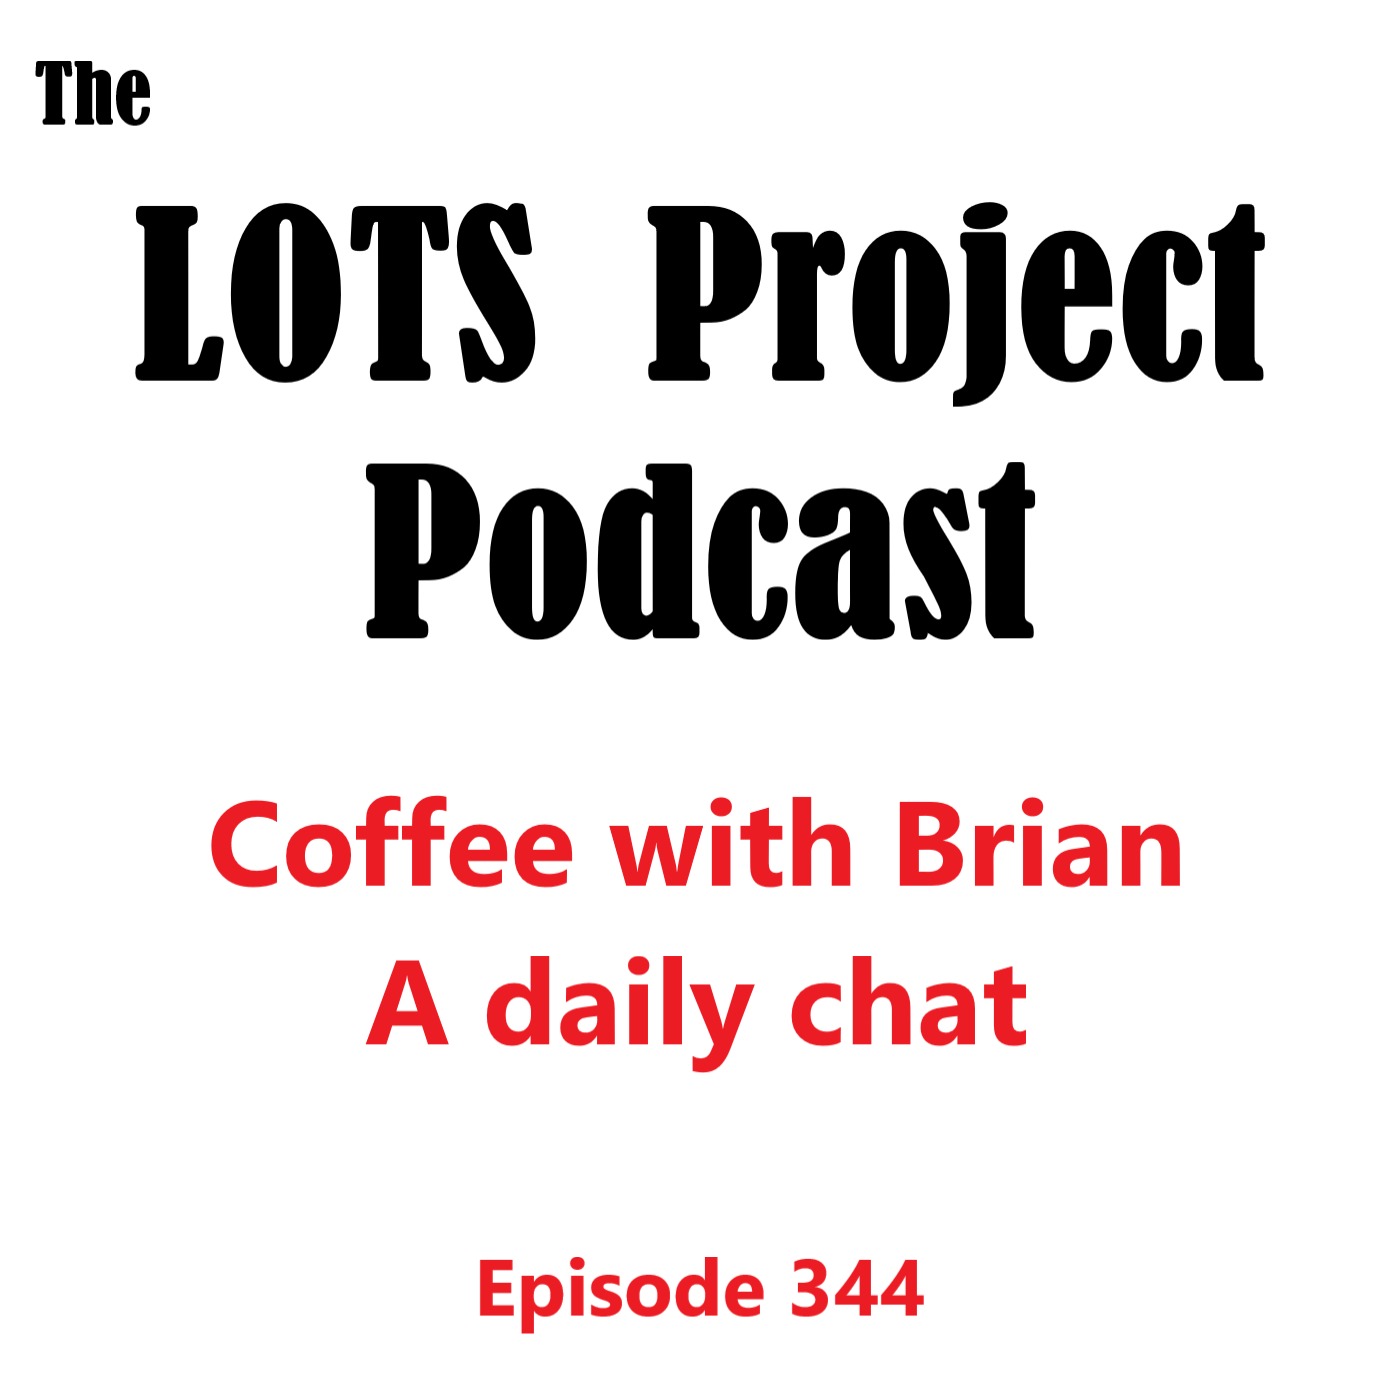 Episode 344 Coffee with Brian, A Daily Morning Chat #podcast #daily #nomad #coffee ⚡lots@getalby.com